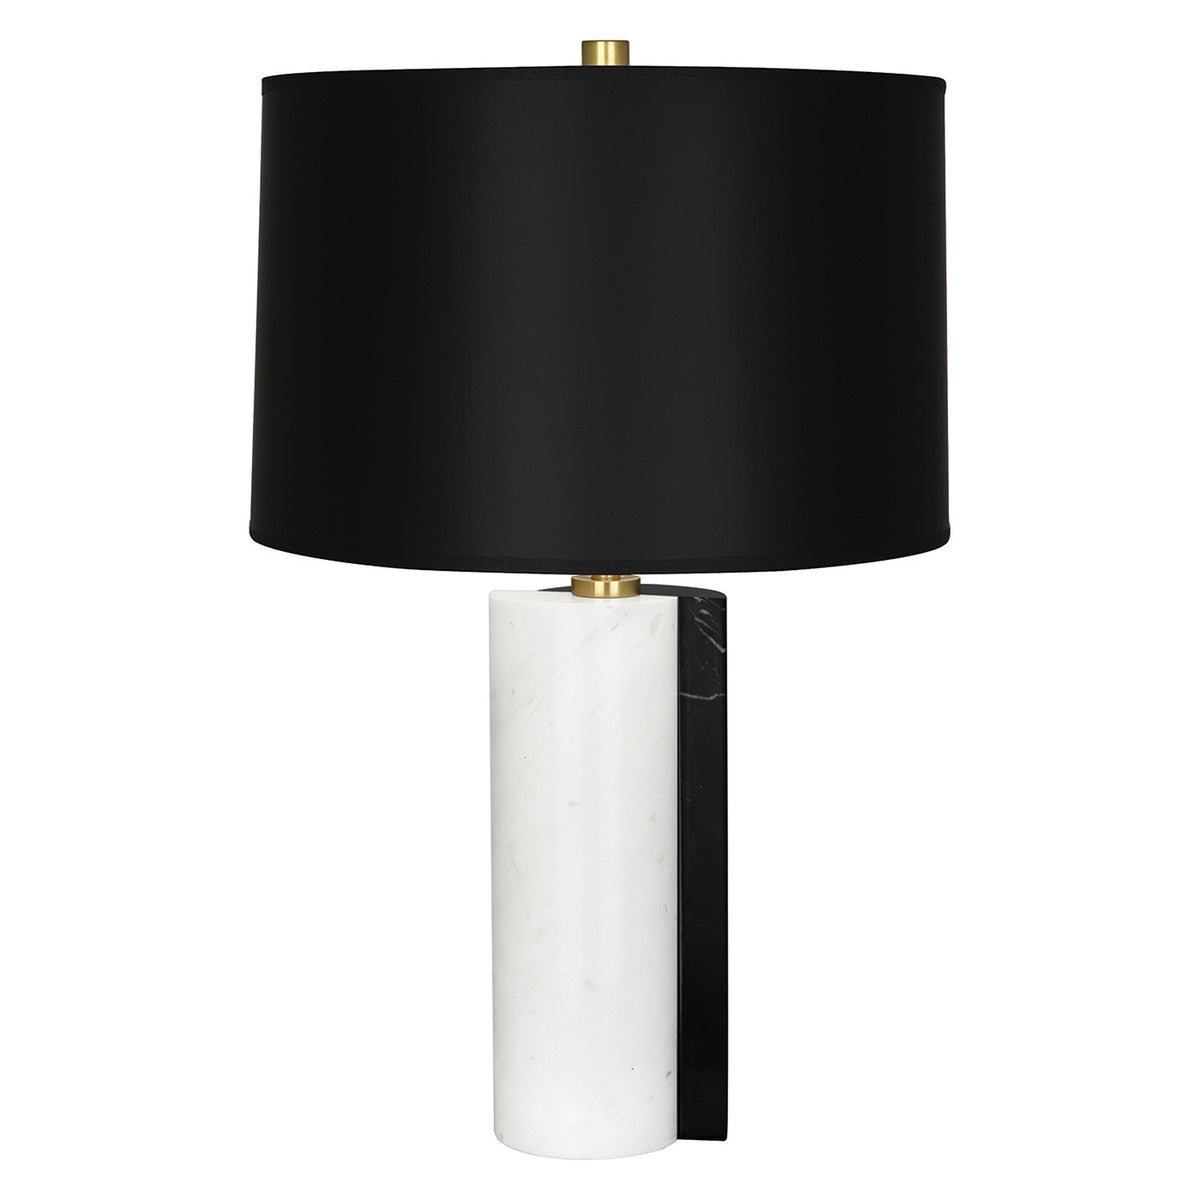 Canaan Shift Table Lamp by Jonathan Adler